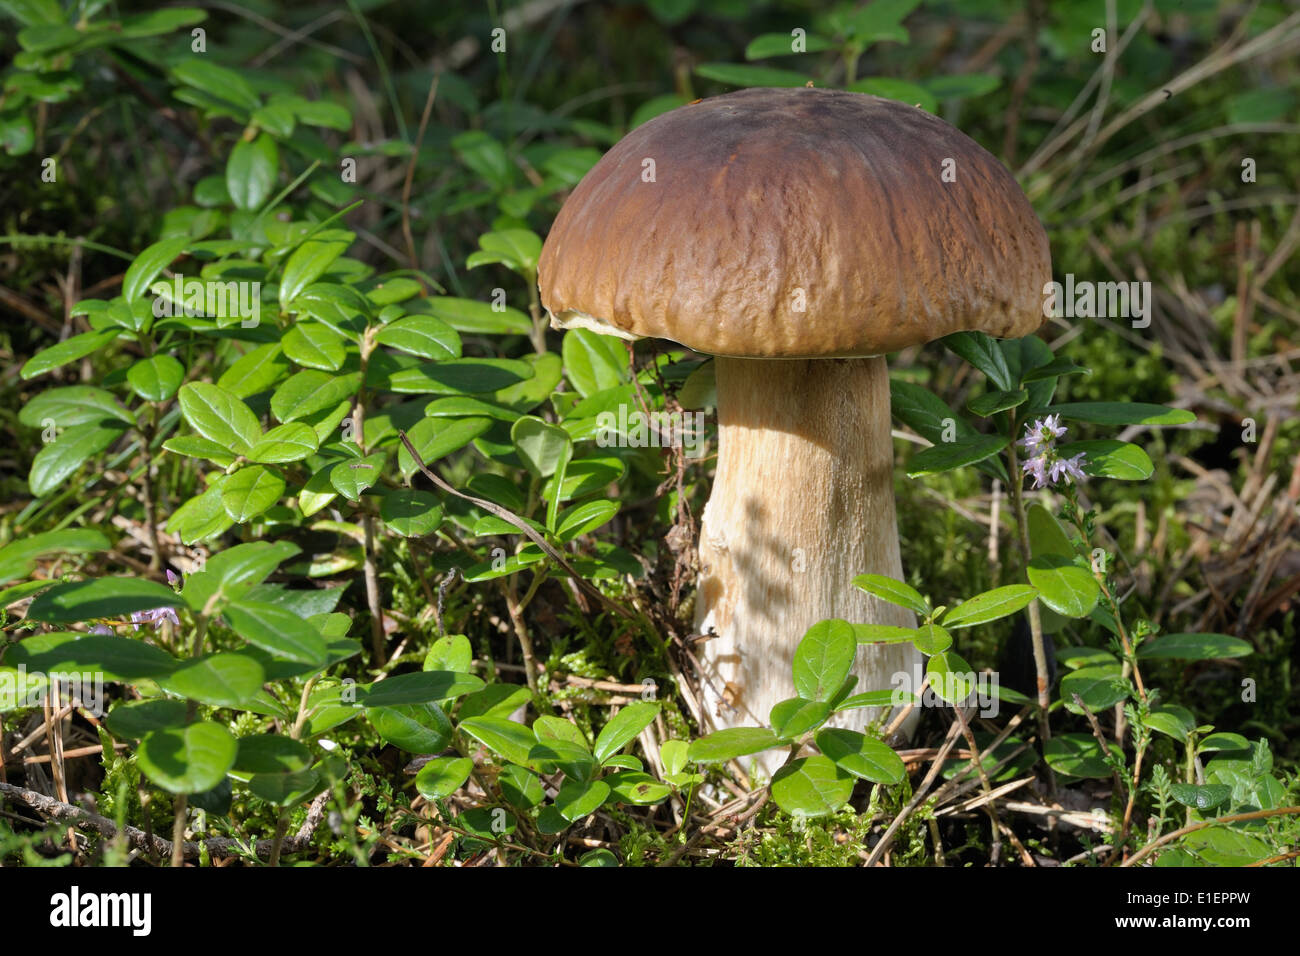 sturdy young white mushroom in the forest in late summer. Stock Photo